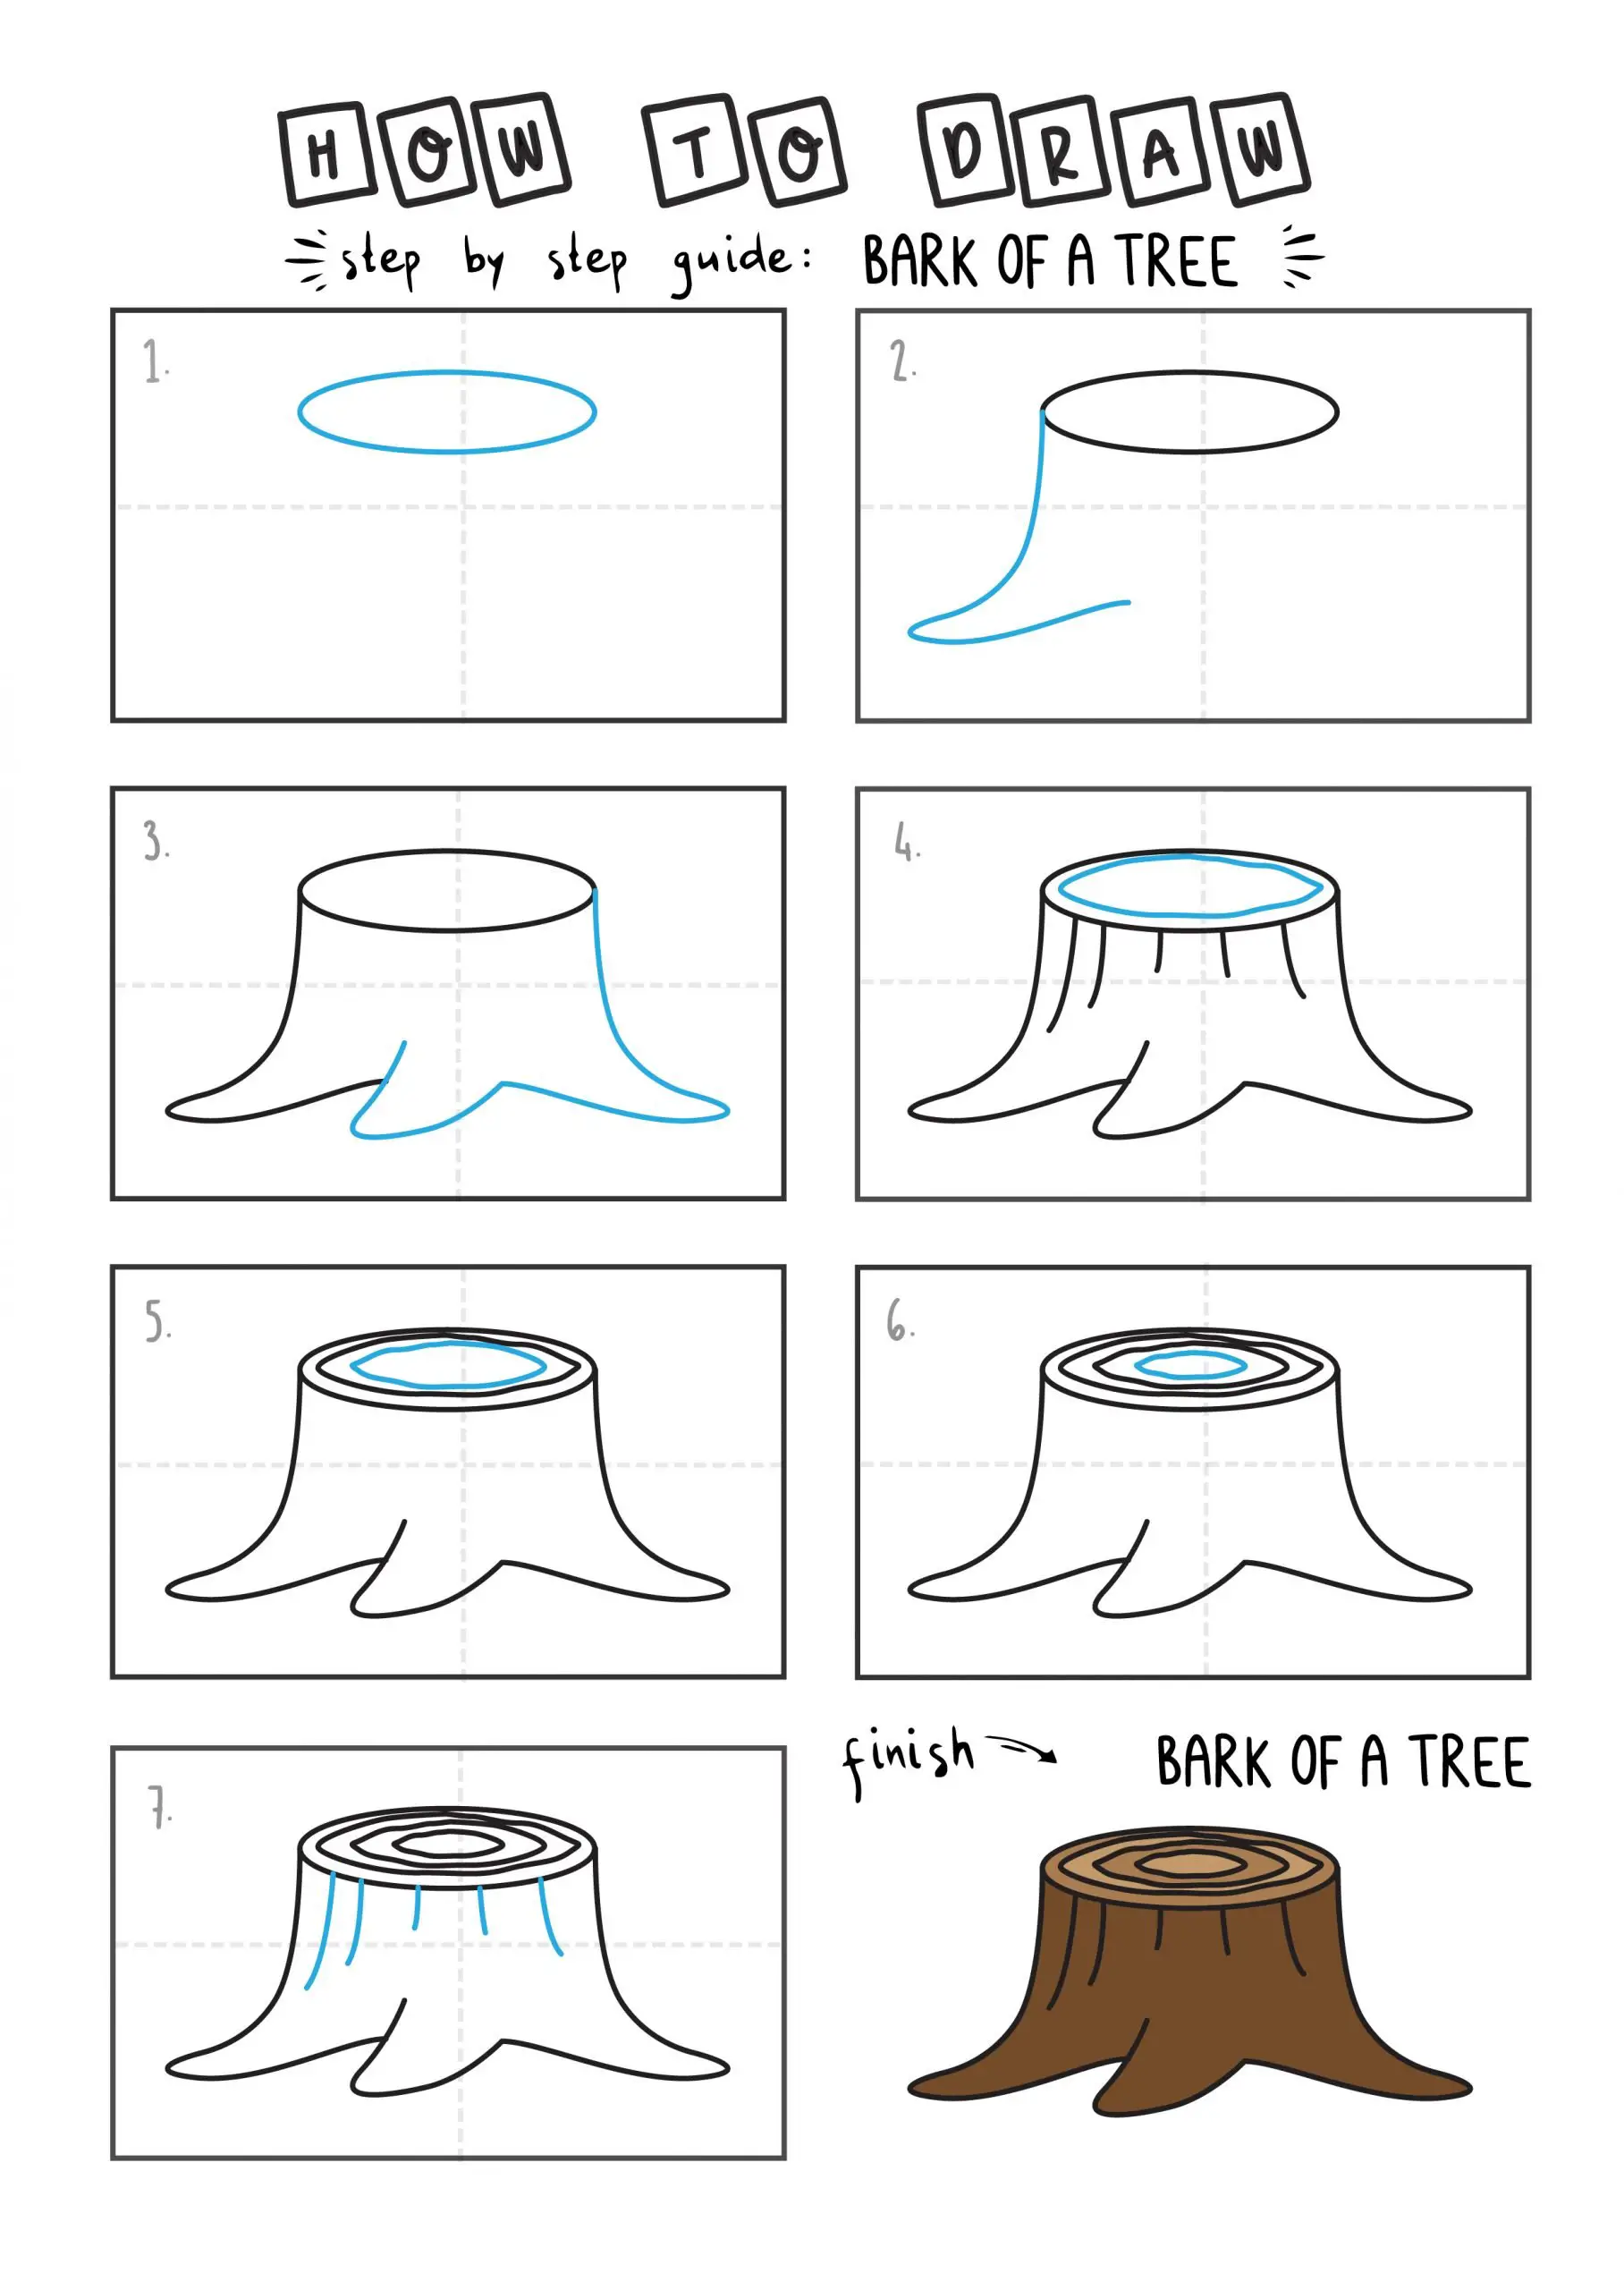 How To Draw Bark of a Tree Step By Step For Kids Easy Illustration Doodle Drawing GUIDE